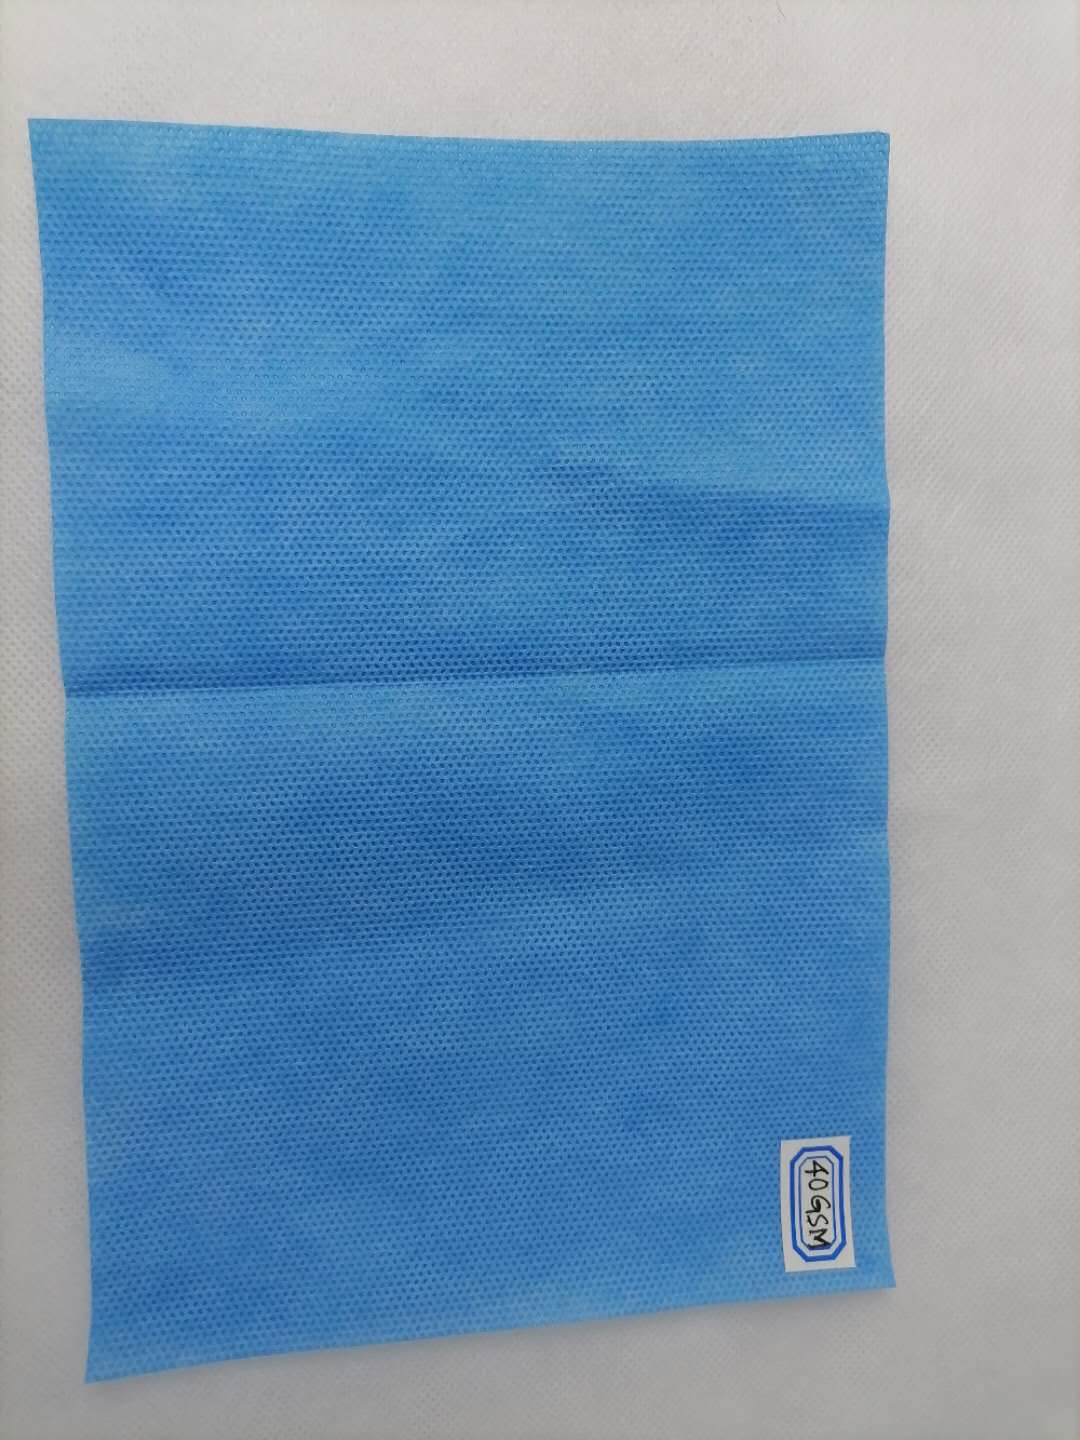 Medical Gown Pp Nonwoven SMS Fabric Polypropylene Spunbonded Nonwoven Fabric for Protective Clothing